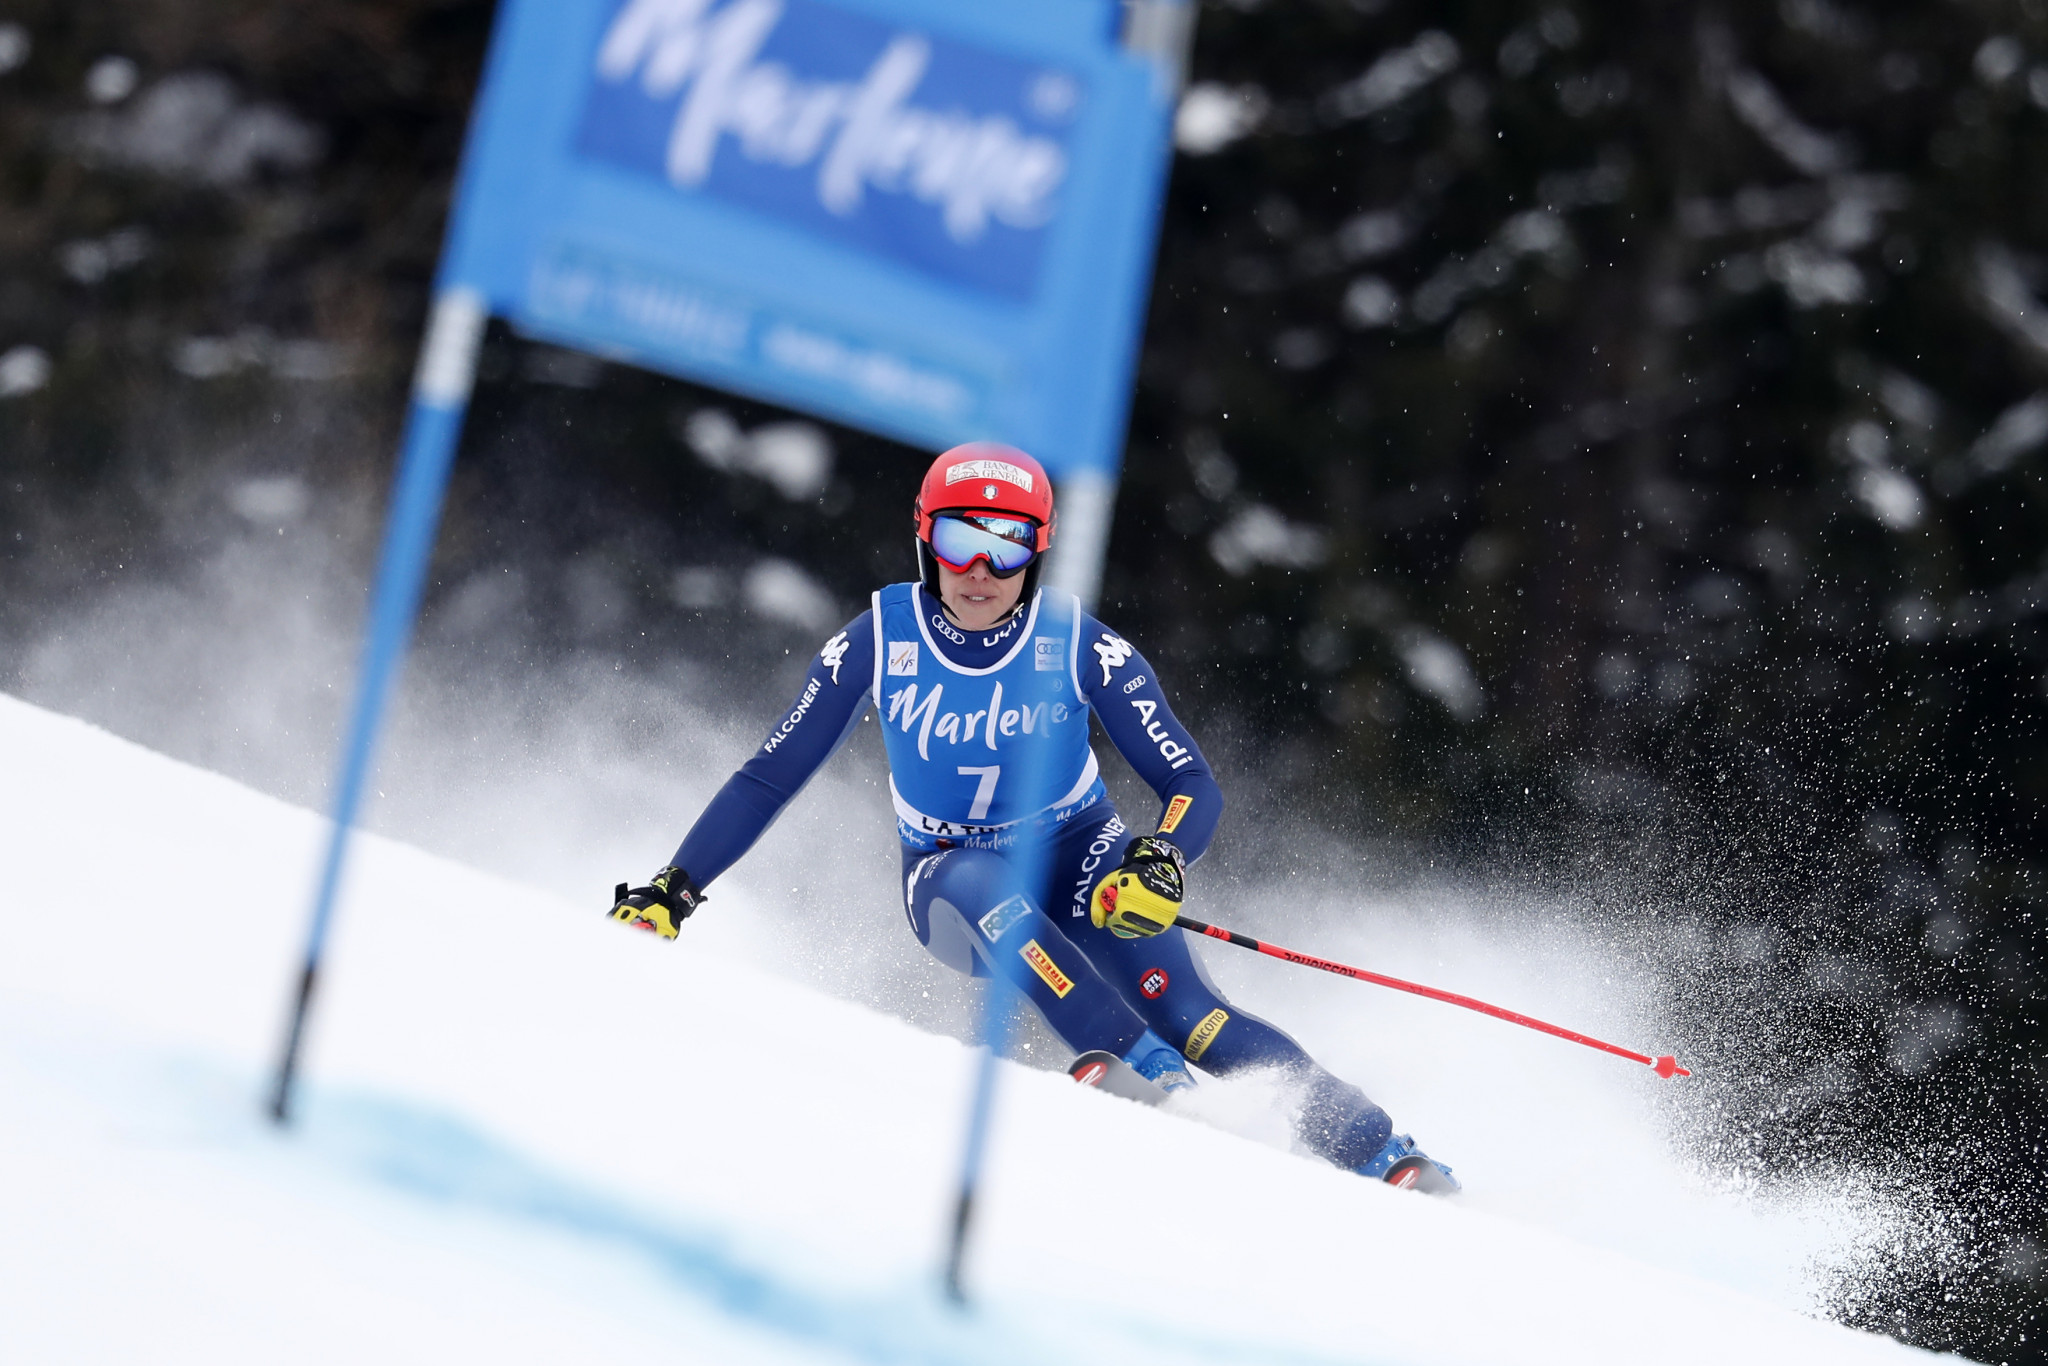 Federica Brignone of Italy is expected to challenge in the women's giant slalom at the FIS Alpine Ski World Cup event in Sölden ©Getty Images